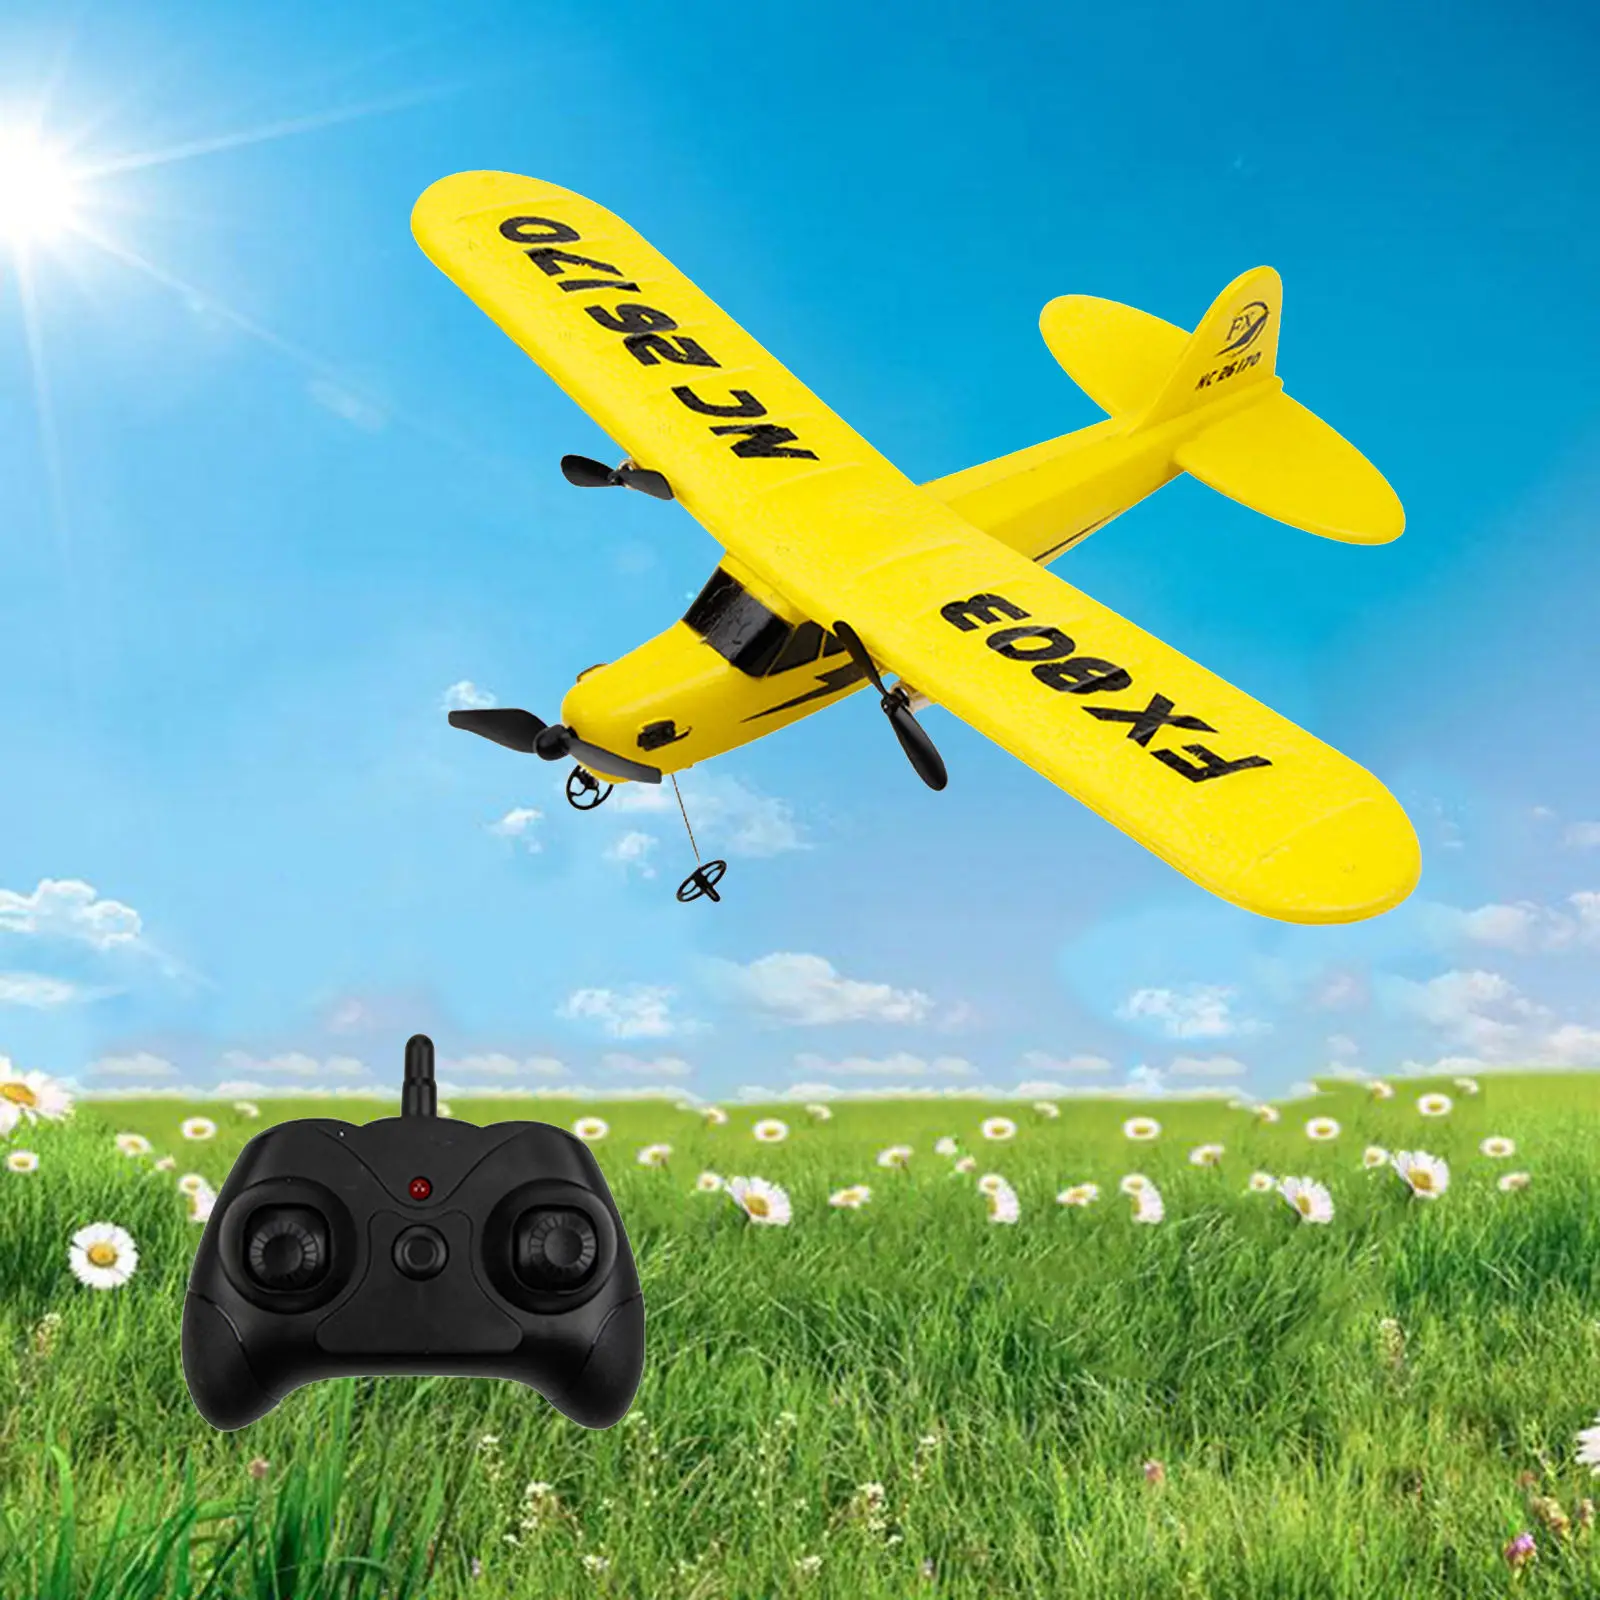 RC Plane, 2.4G Remote Control Airplane Foam Hand RC Aircraft Glider, DIY Kit Toys for Kids Beginners